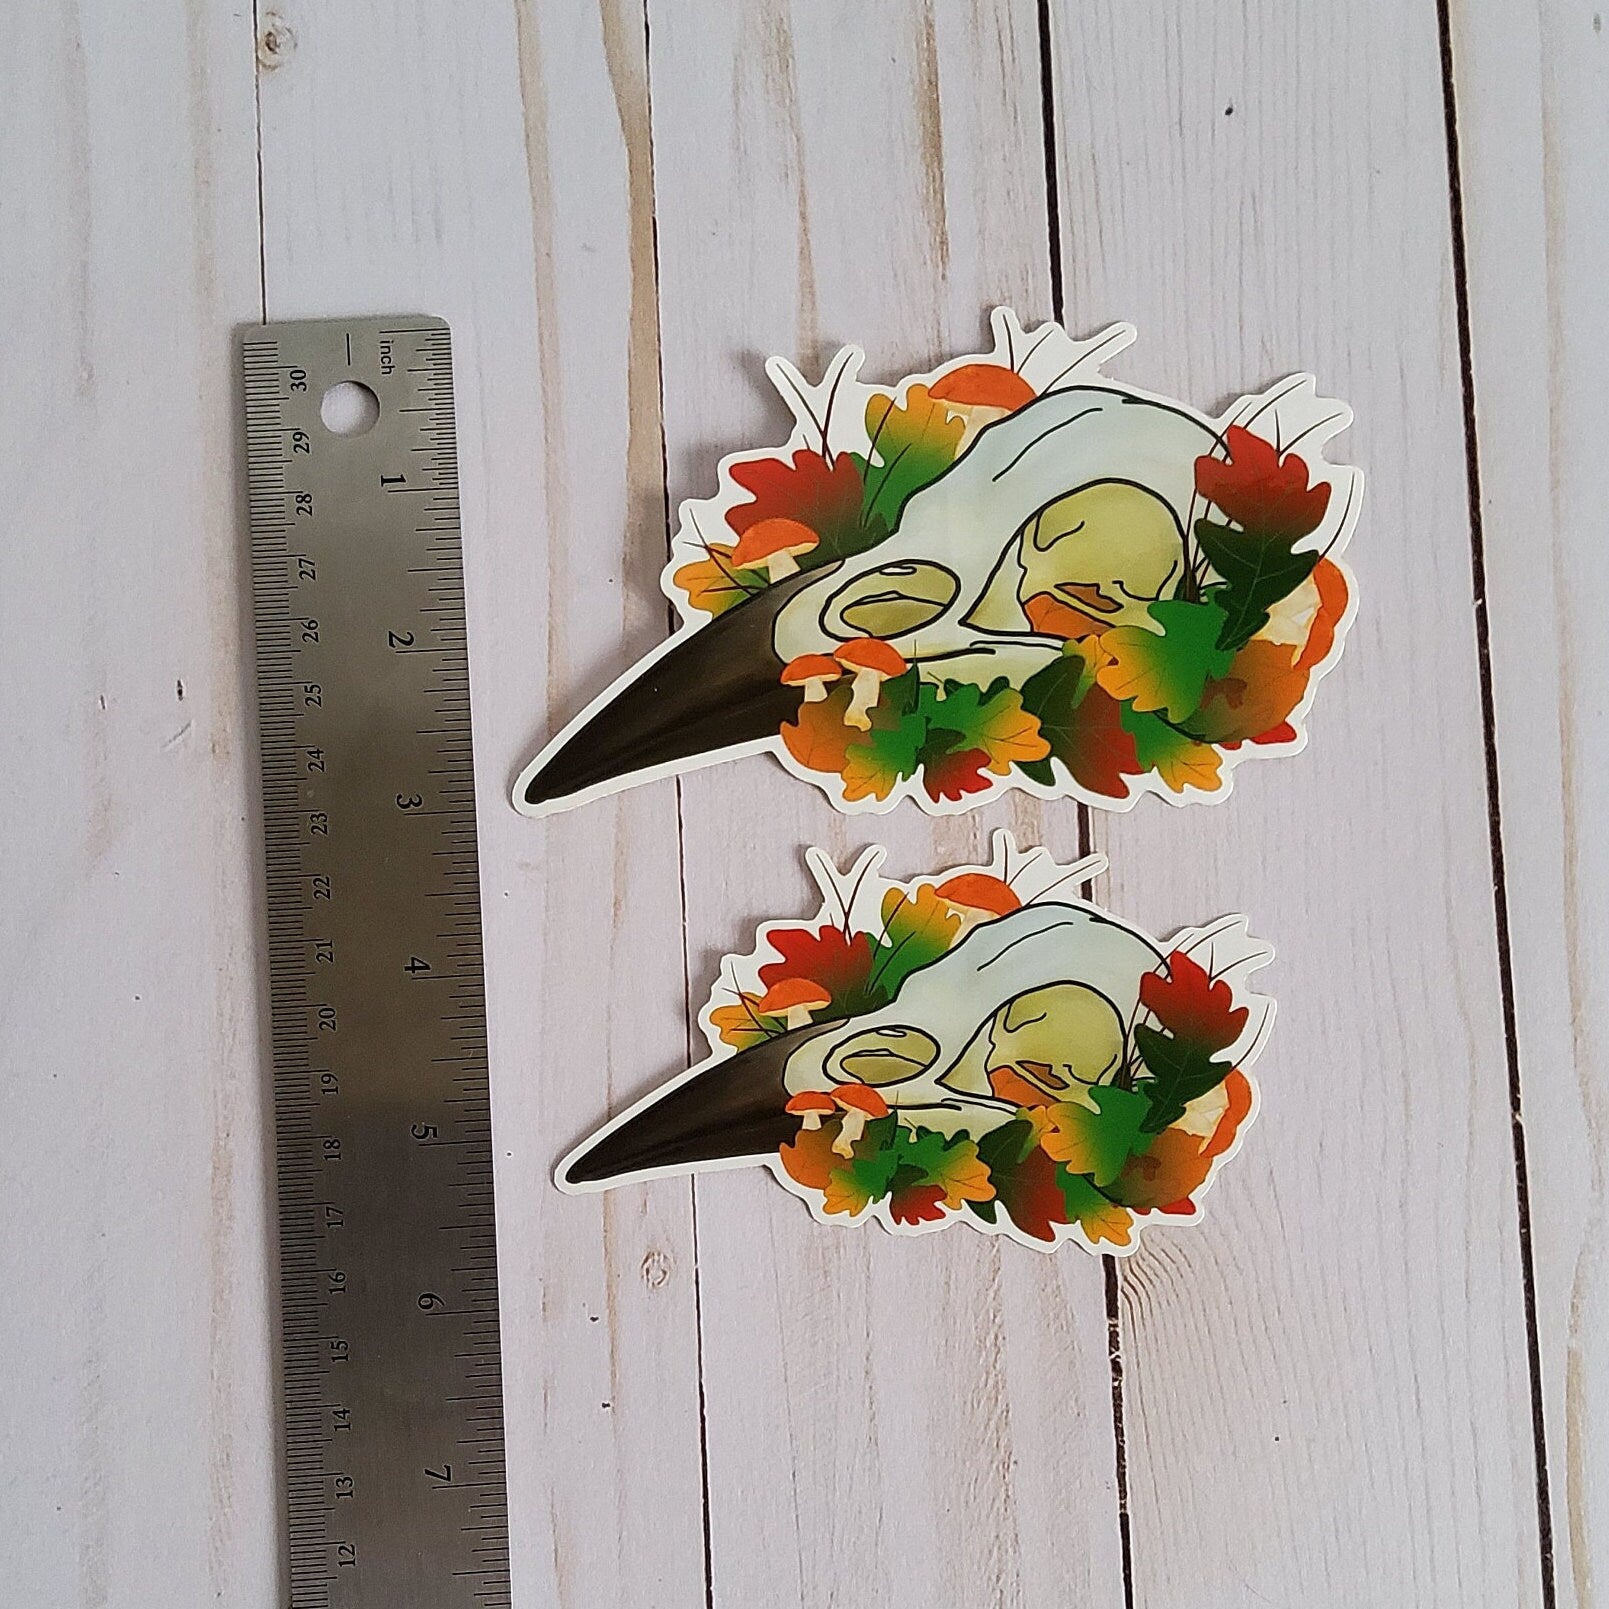 GLOSSY STICKER: Crow Skull and Leaves Sticker , Crow Skull Sticker , Mushroom Skull Sticker , Crow Skull and Leaves , Crow and Mushroom